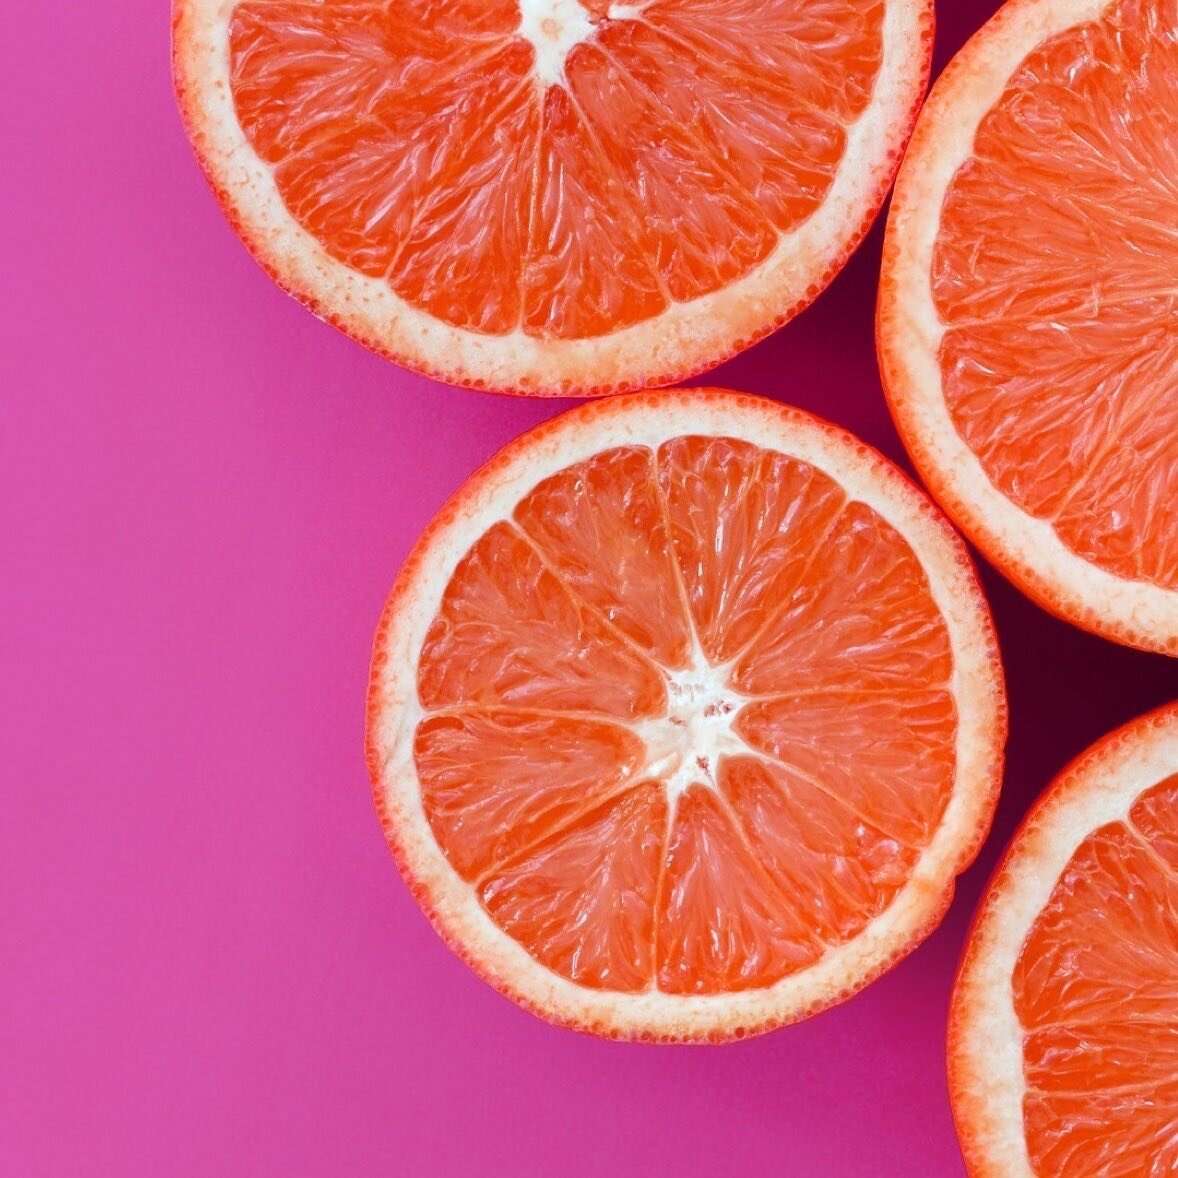 February is National #Grapefruit Month! Check out these fun facts about grapefruit:
💦 Grapefruit is 92% water
🇯🇲 The name for the Grapefruit was created by a Jamaican farmer when he noticed the fruit grew in clusters similar to grapes
👉 Up to 25 